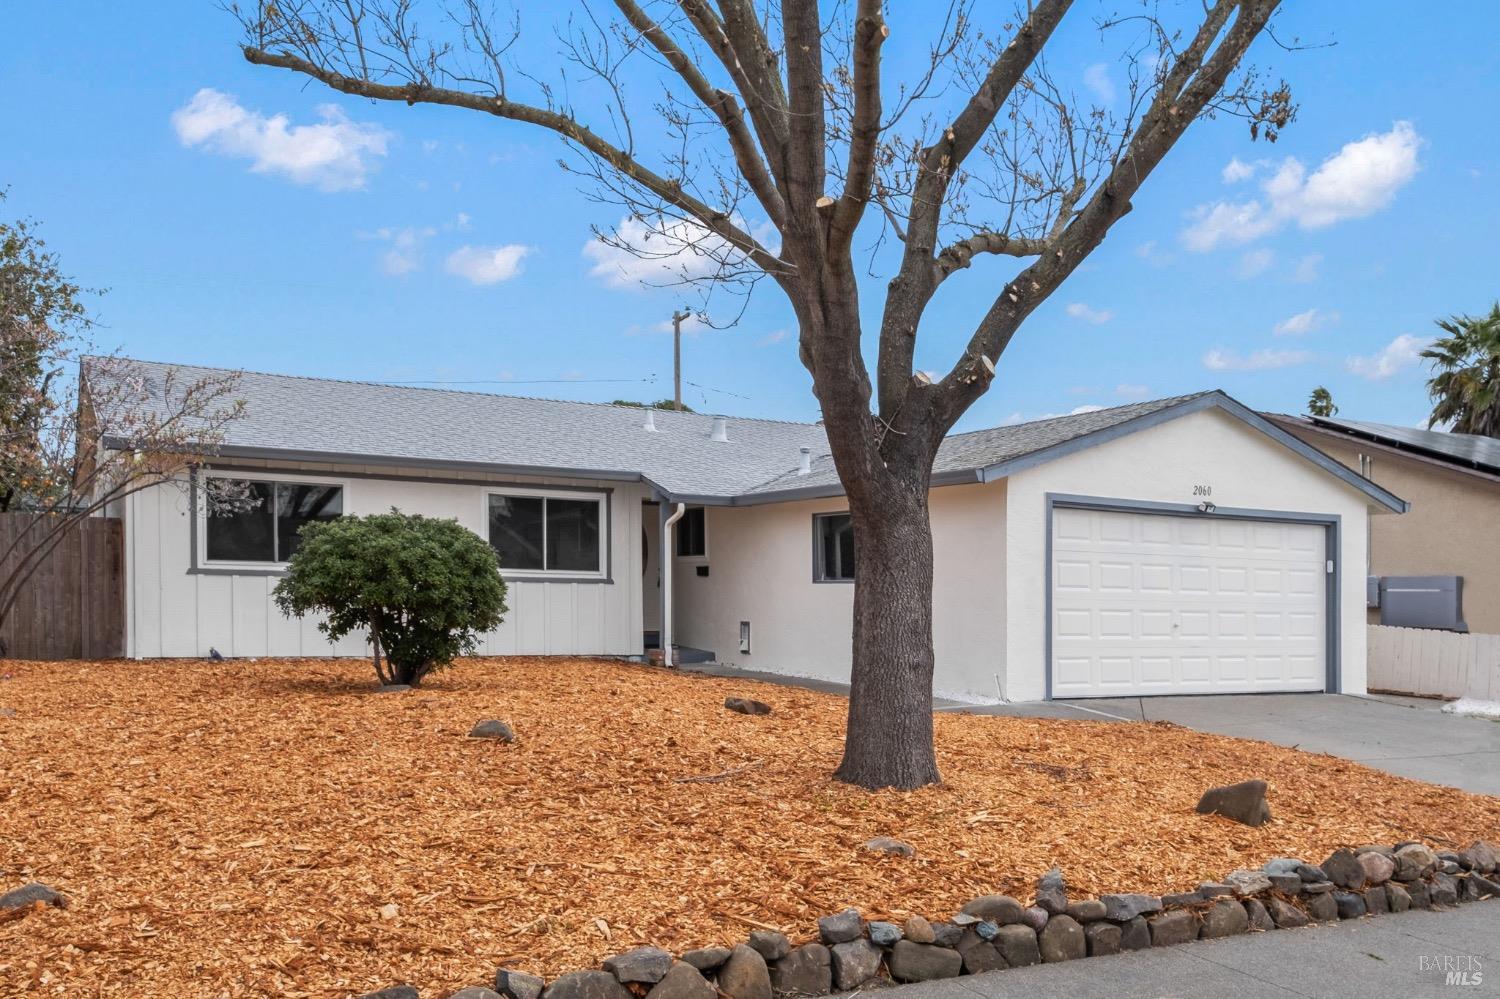 Photo of 2060 Starling Wy in Fairfield, CA